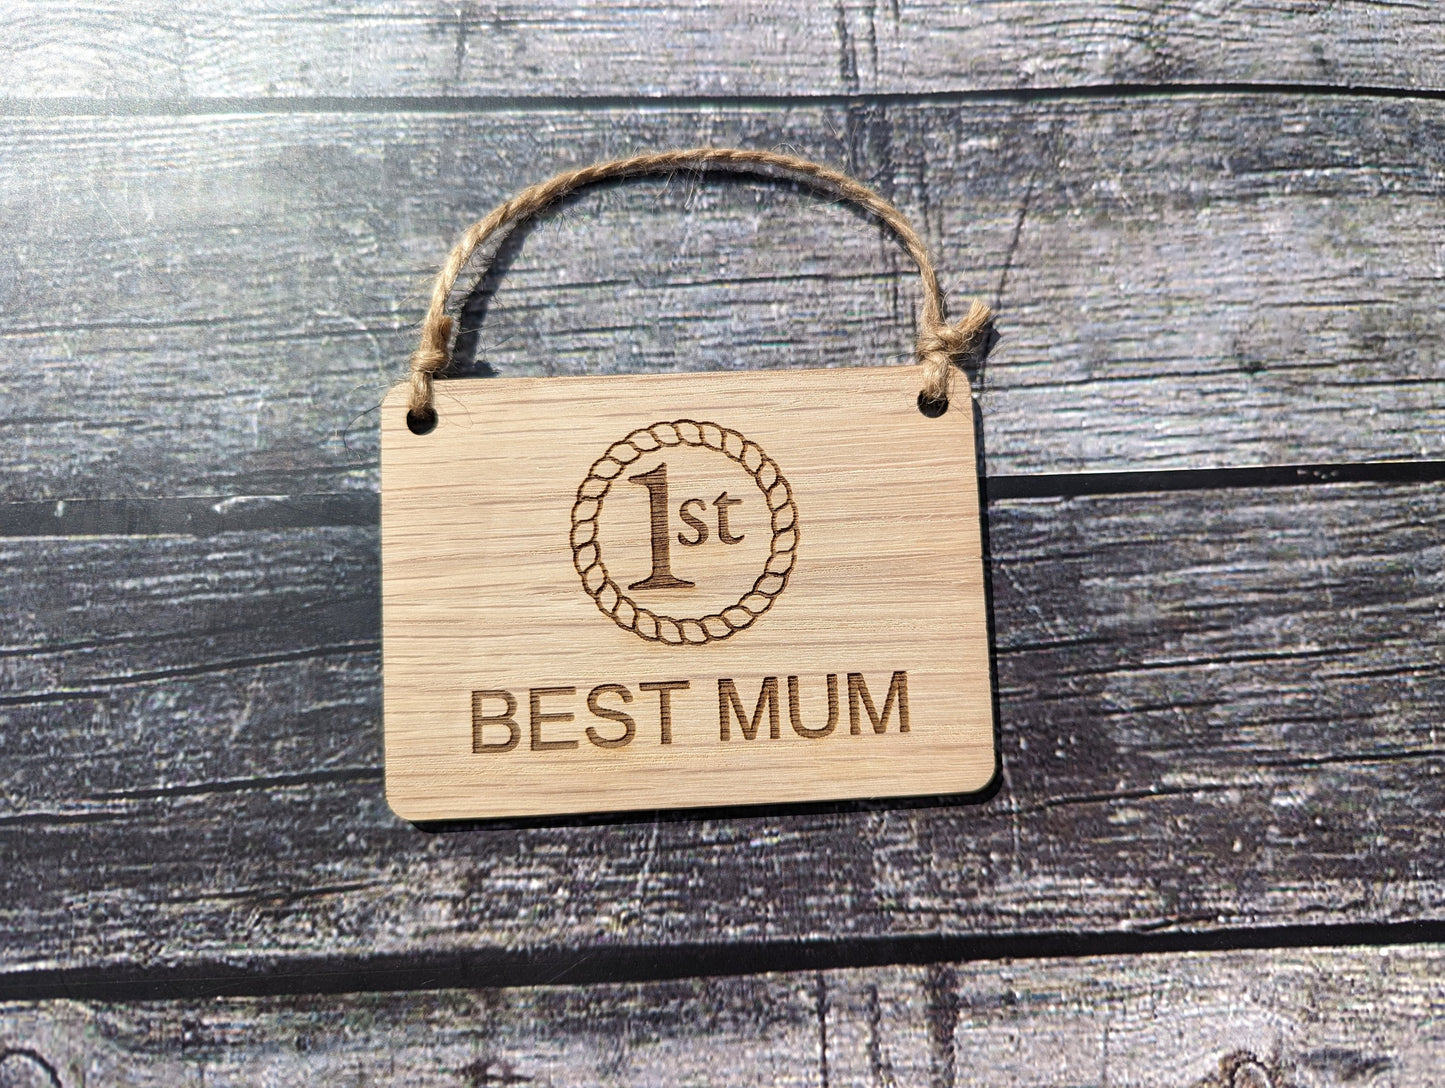 Best Mum, Best Dad, Best Gran, & Best Grandad Sign, Wooden Hanging Sign, Birthday Gift, Fathers Day Gift, Mothers Day Gift